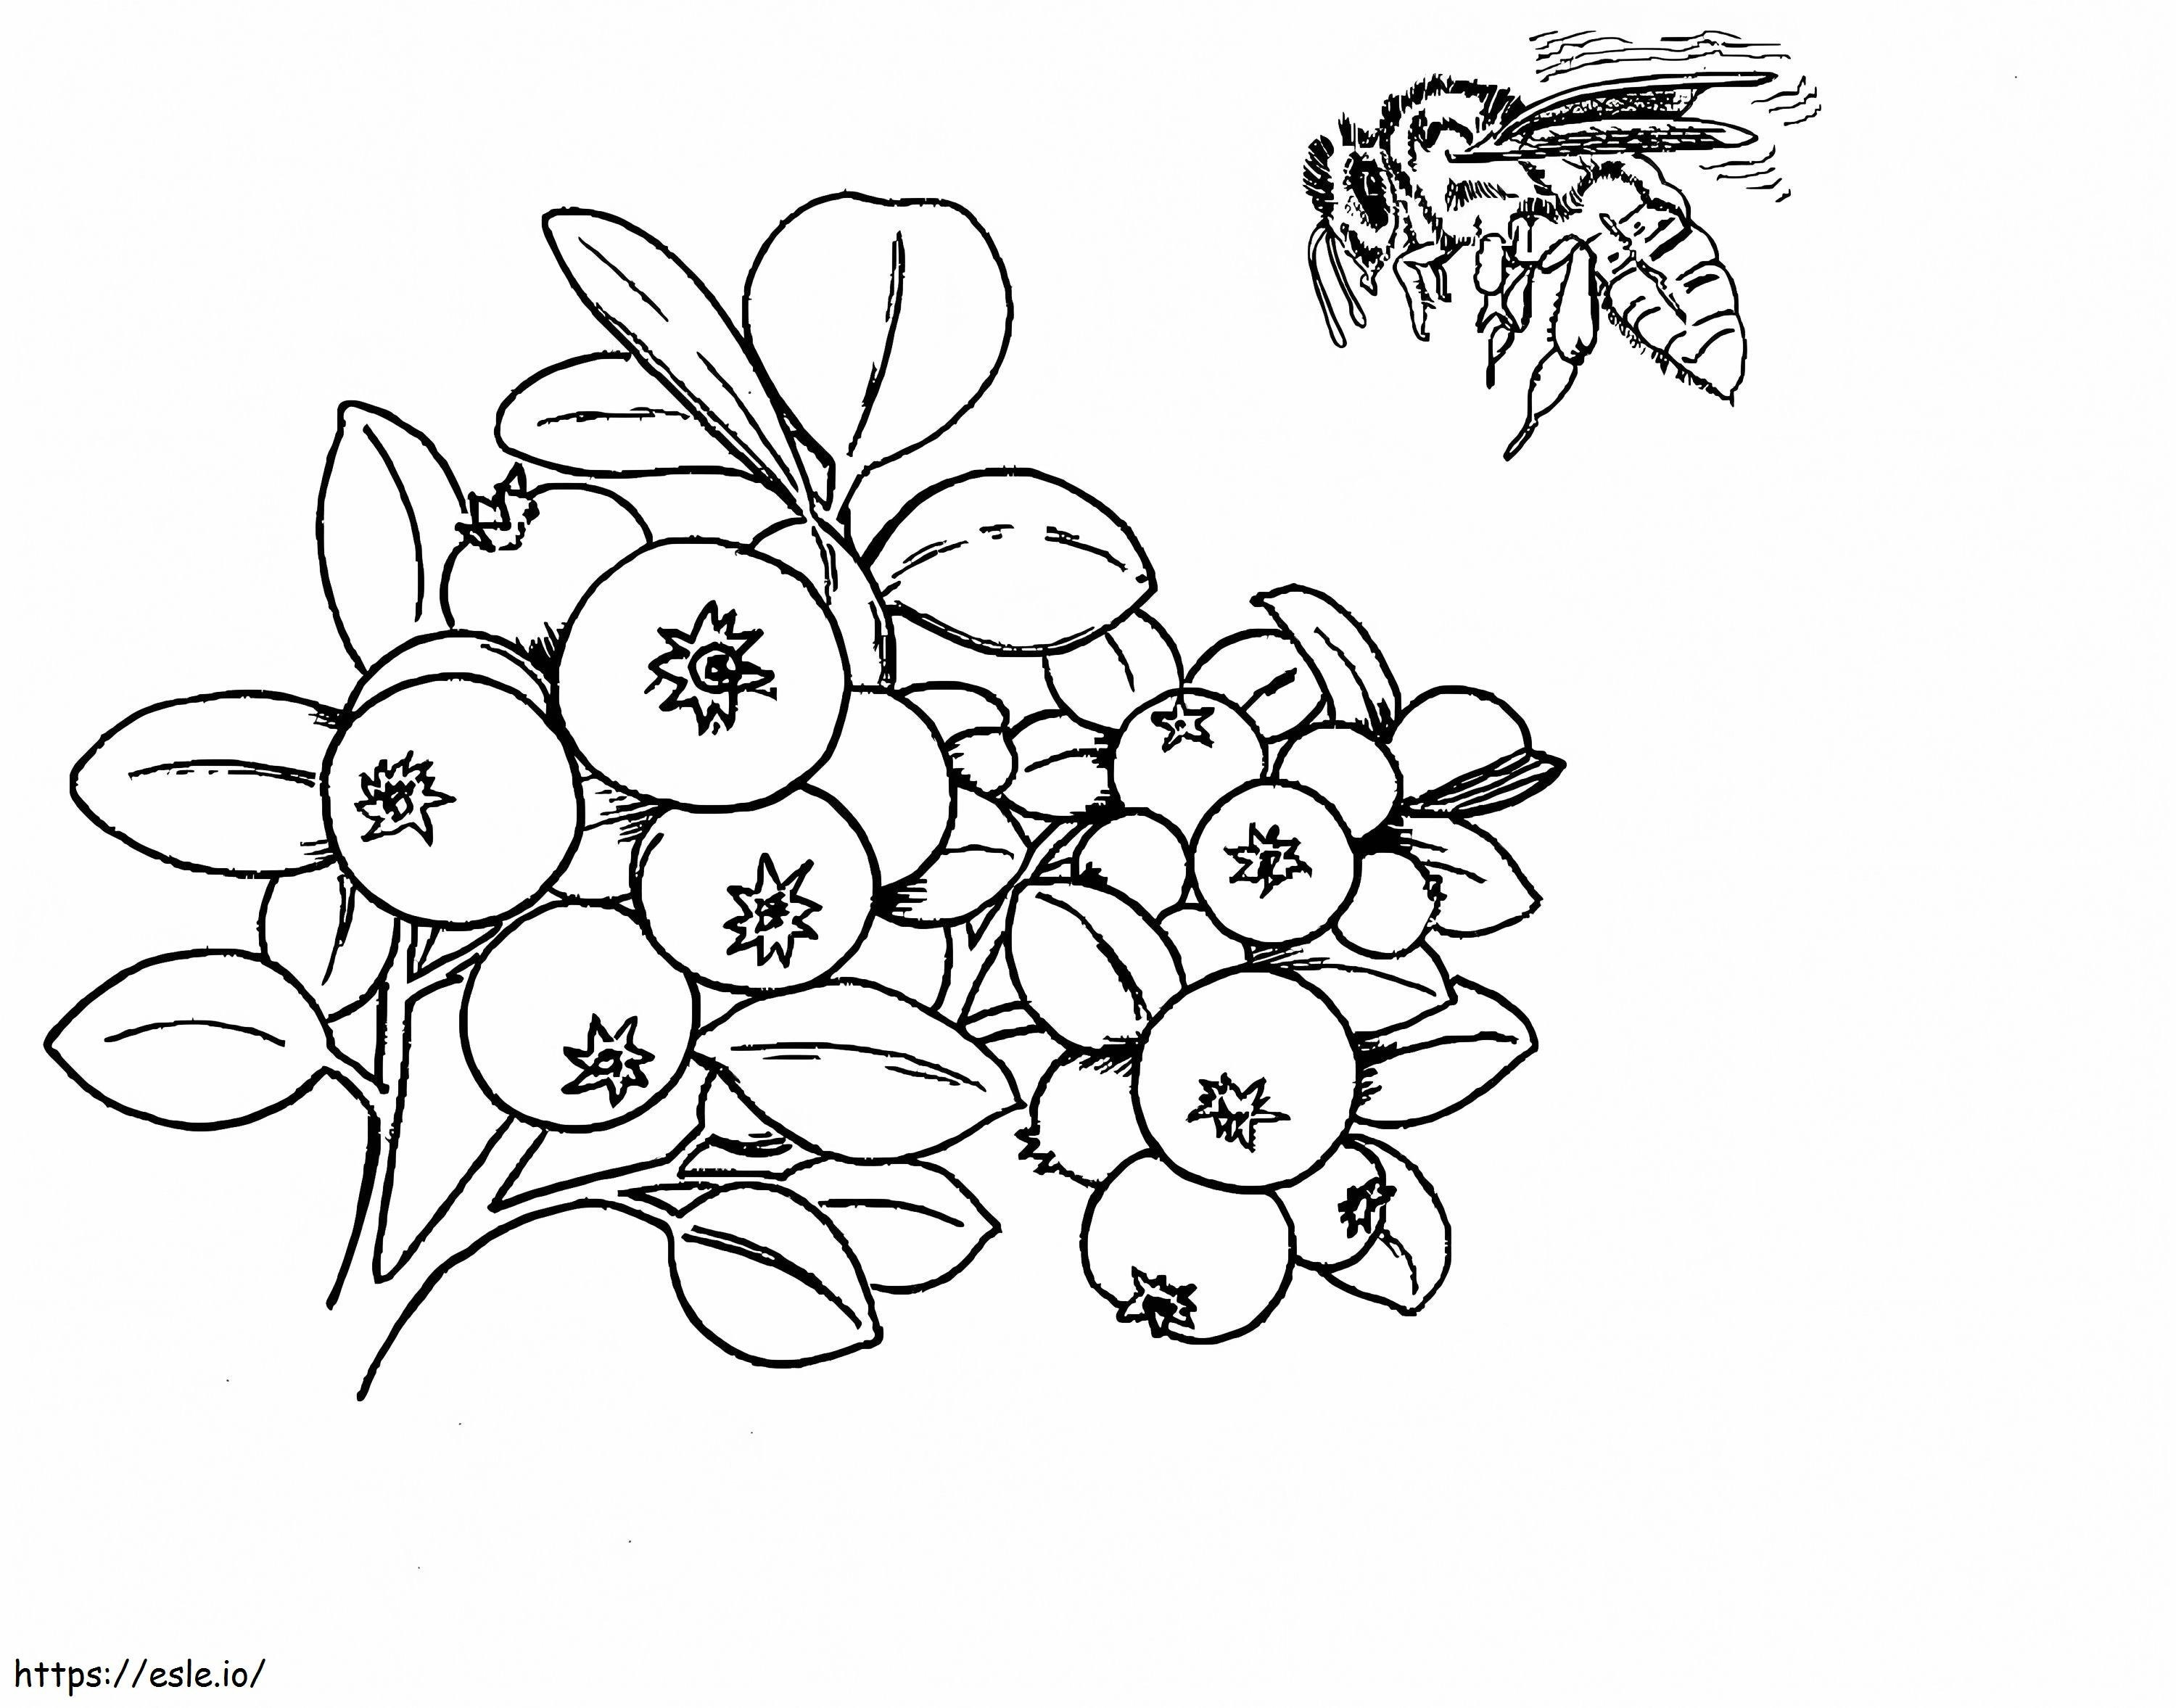 Blackberry And Bee coloring page